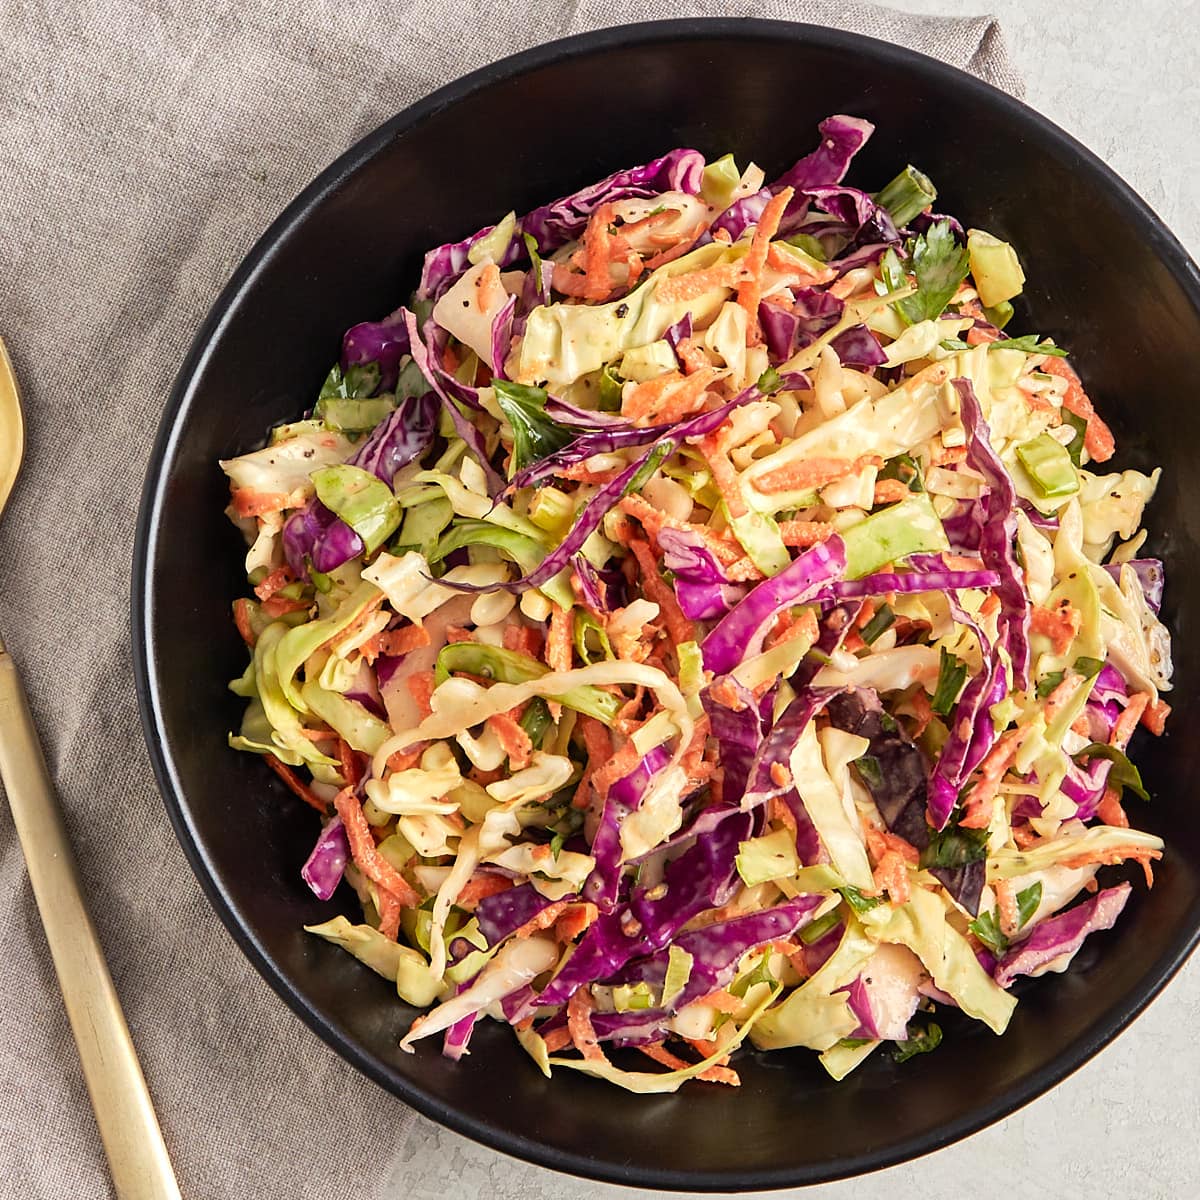 coleslaw in a bowl with a serving spoon.